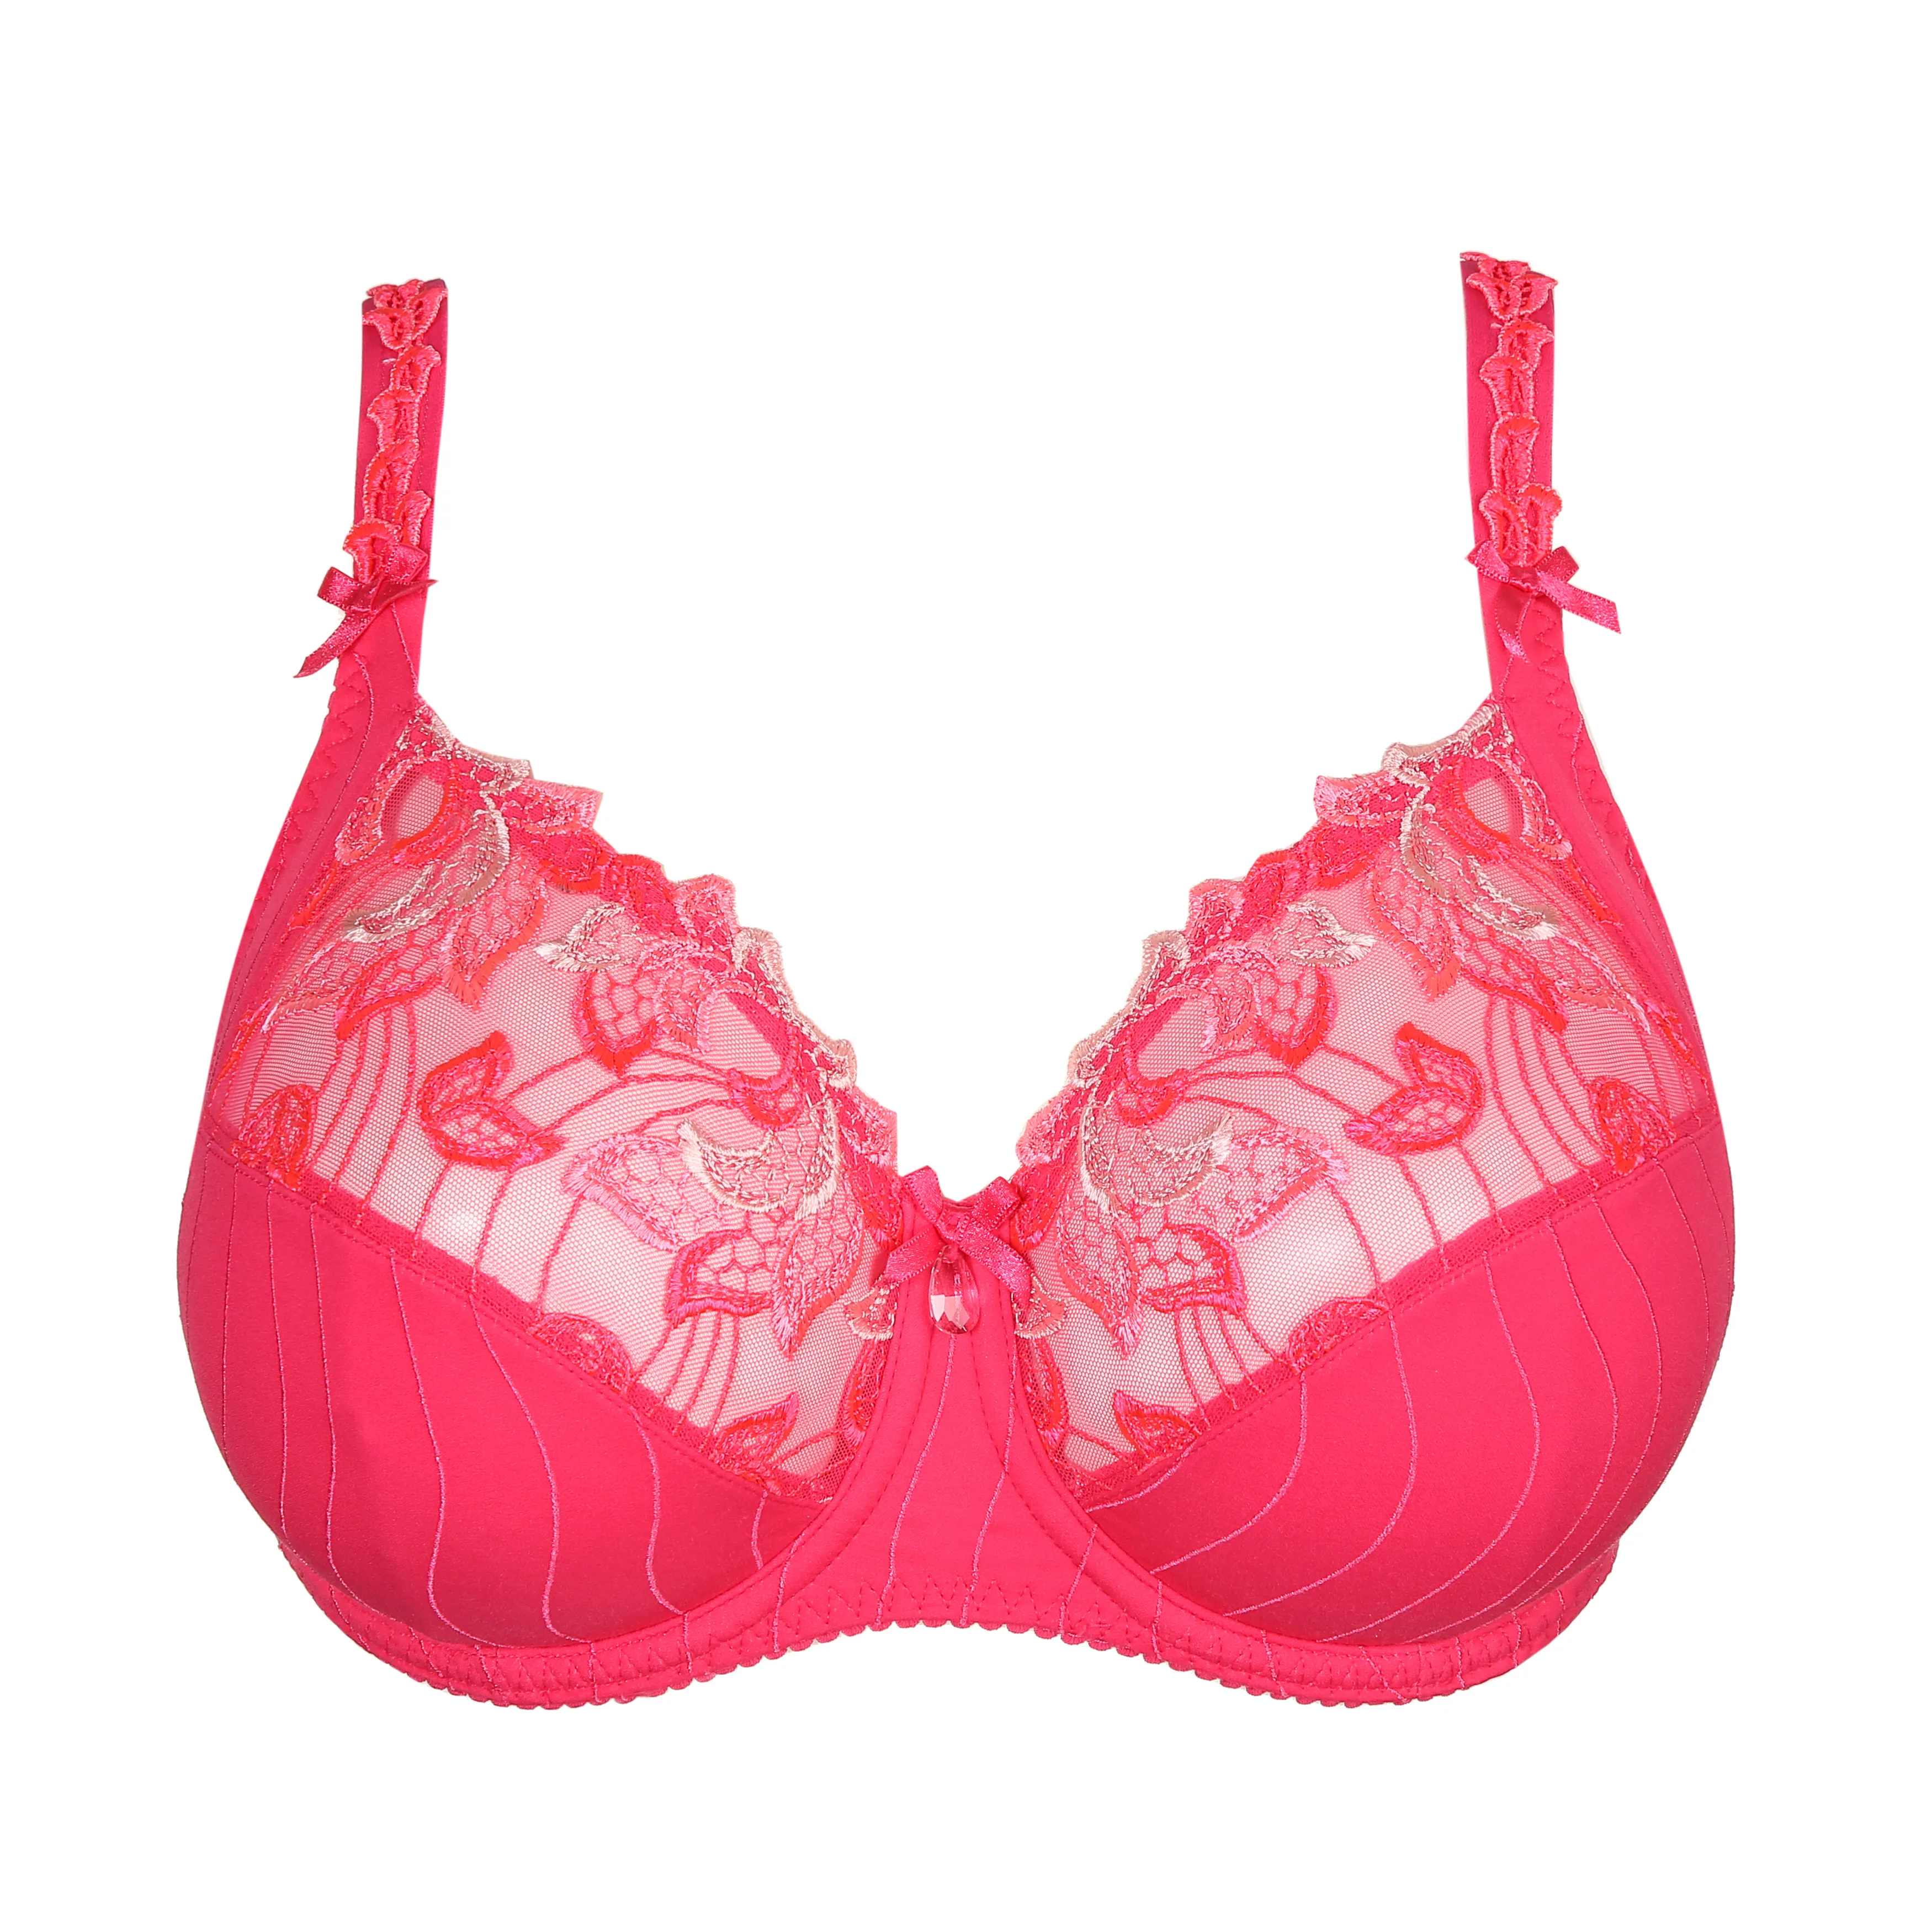 Deauville - Core Collection  Full cup bra, Deauville, Primadonna